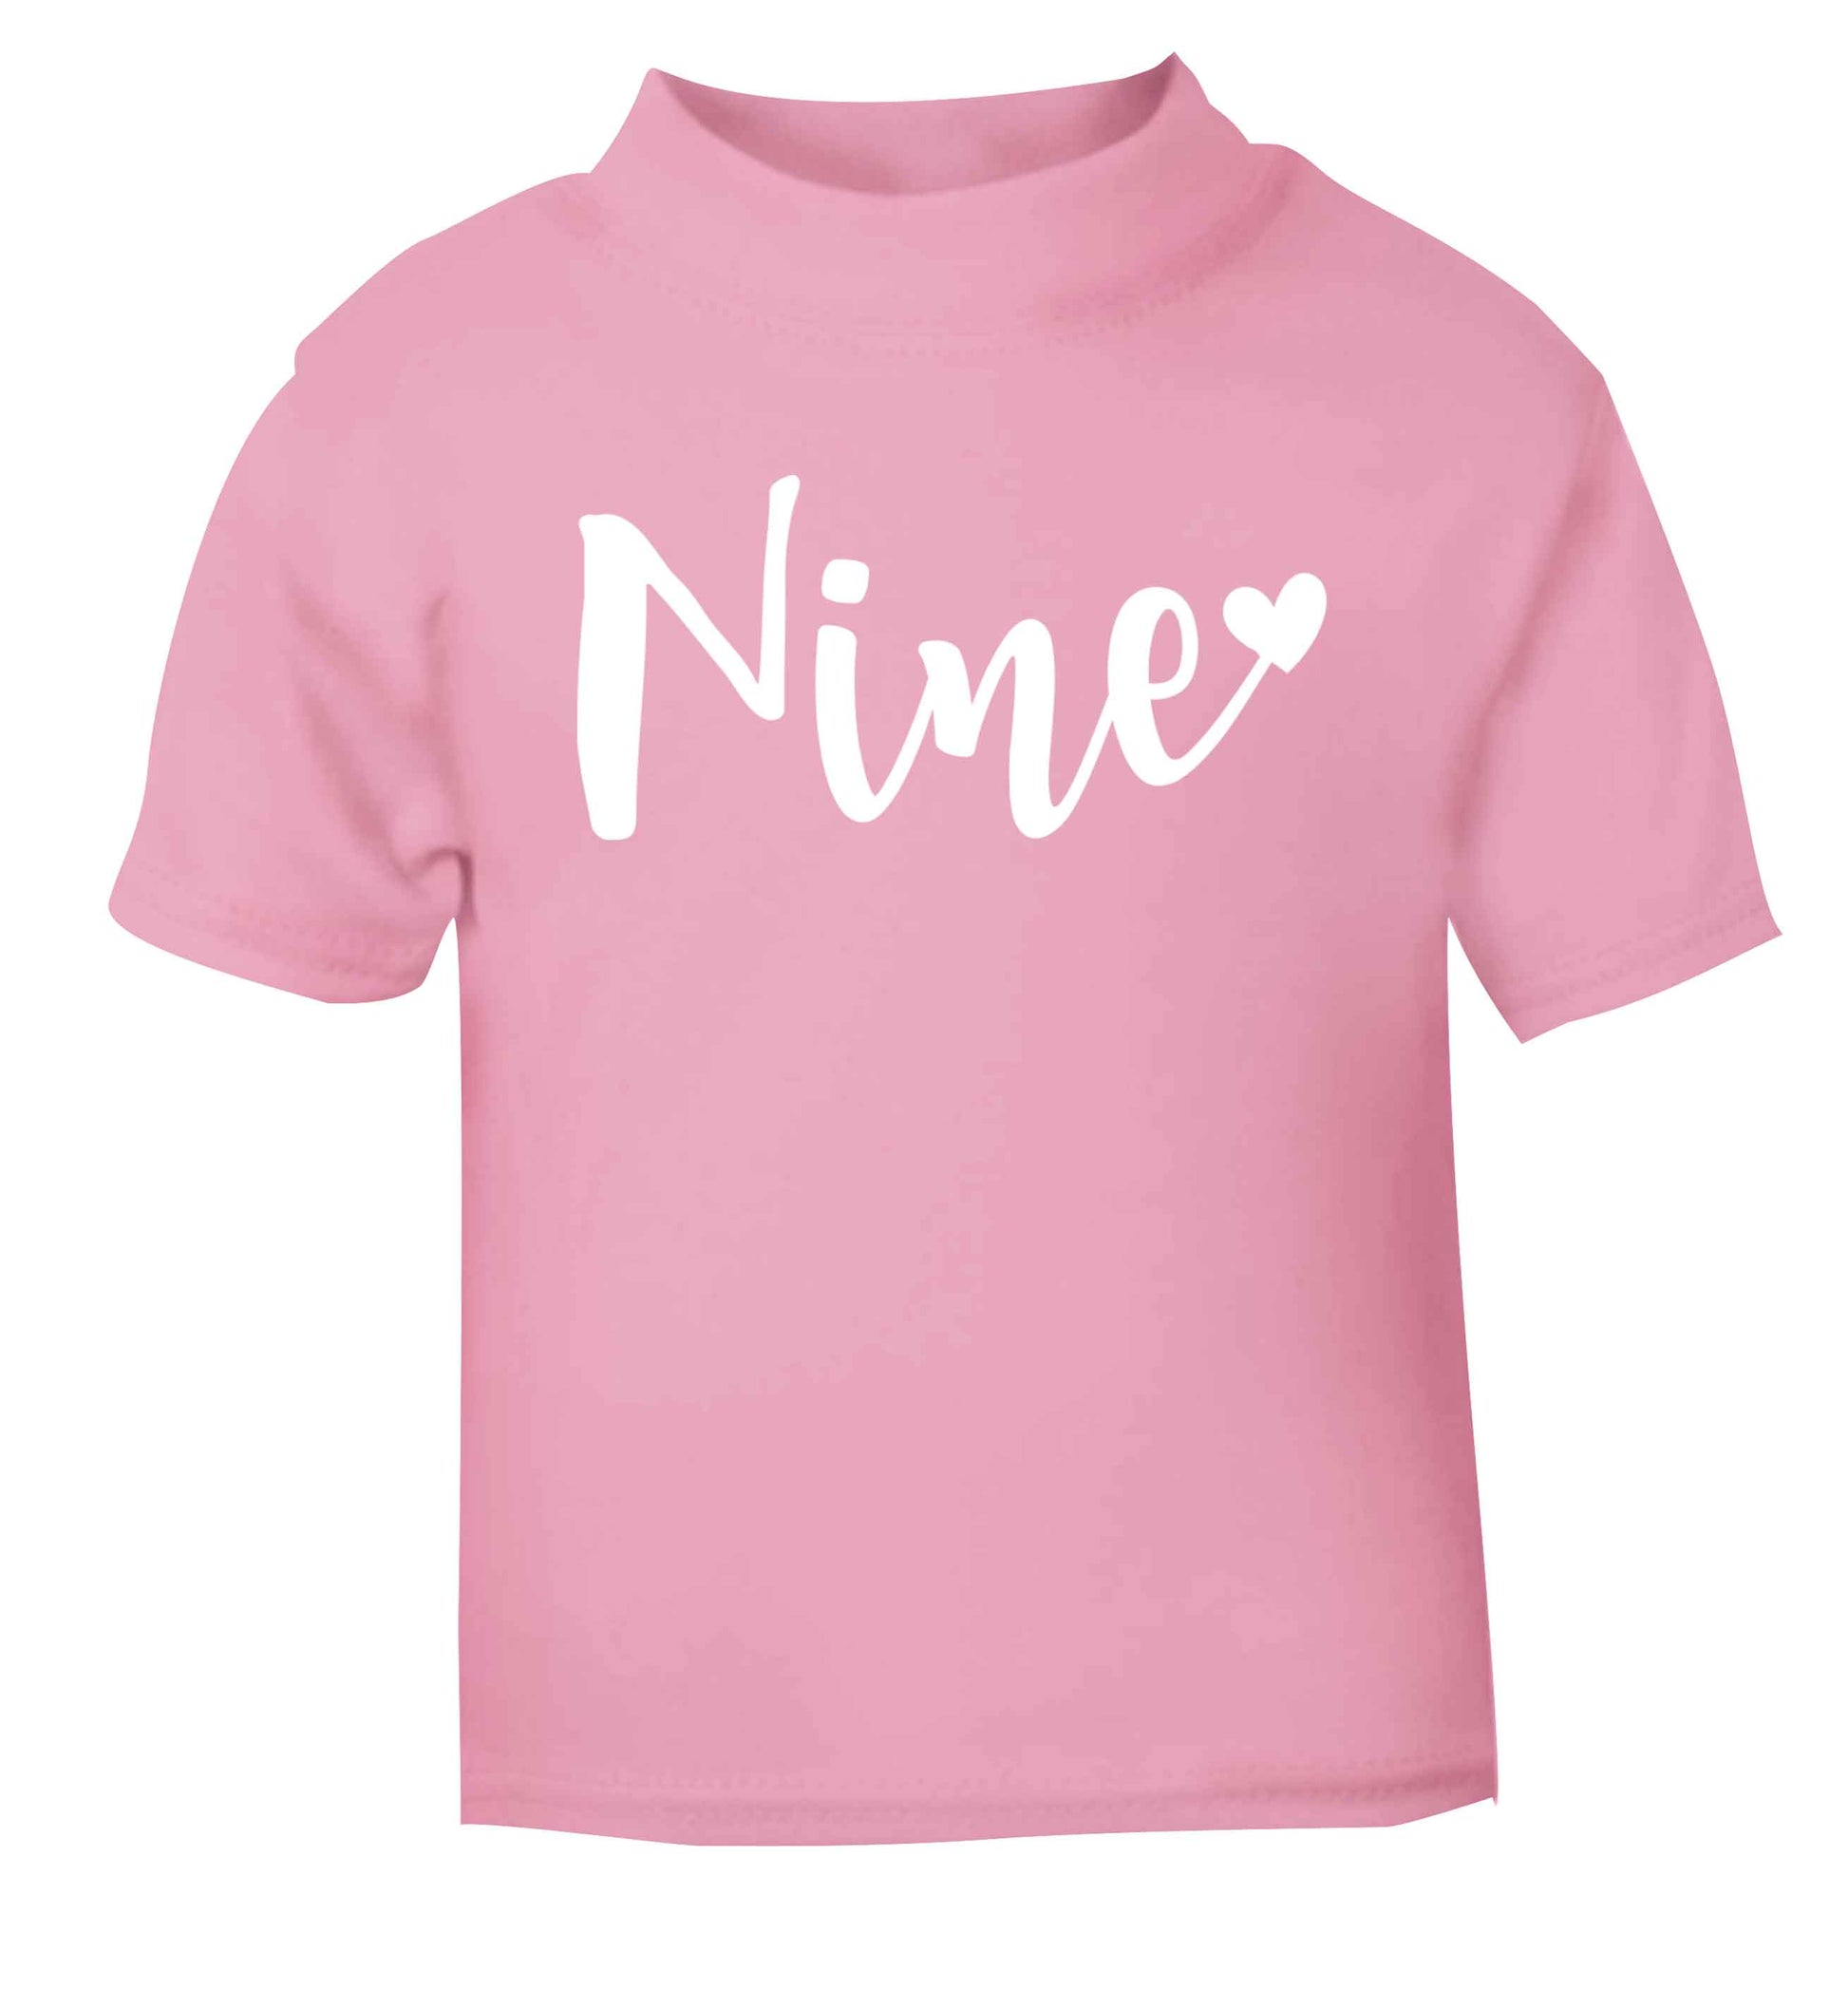 Nine and heart light pink baby toddler Tshirt 2 Years